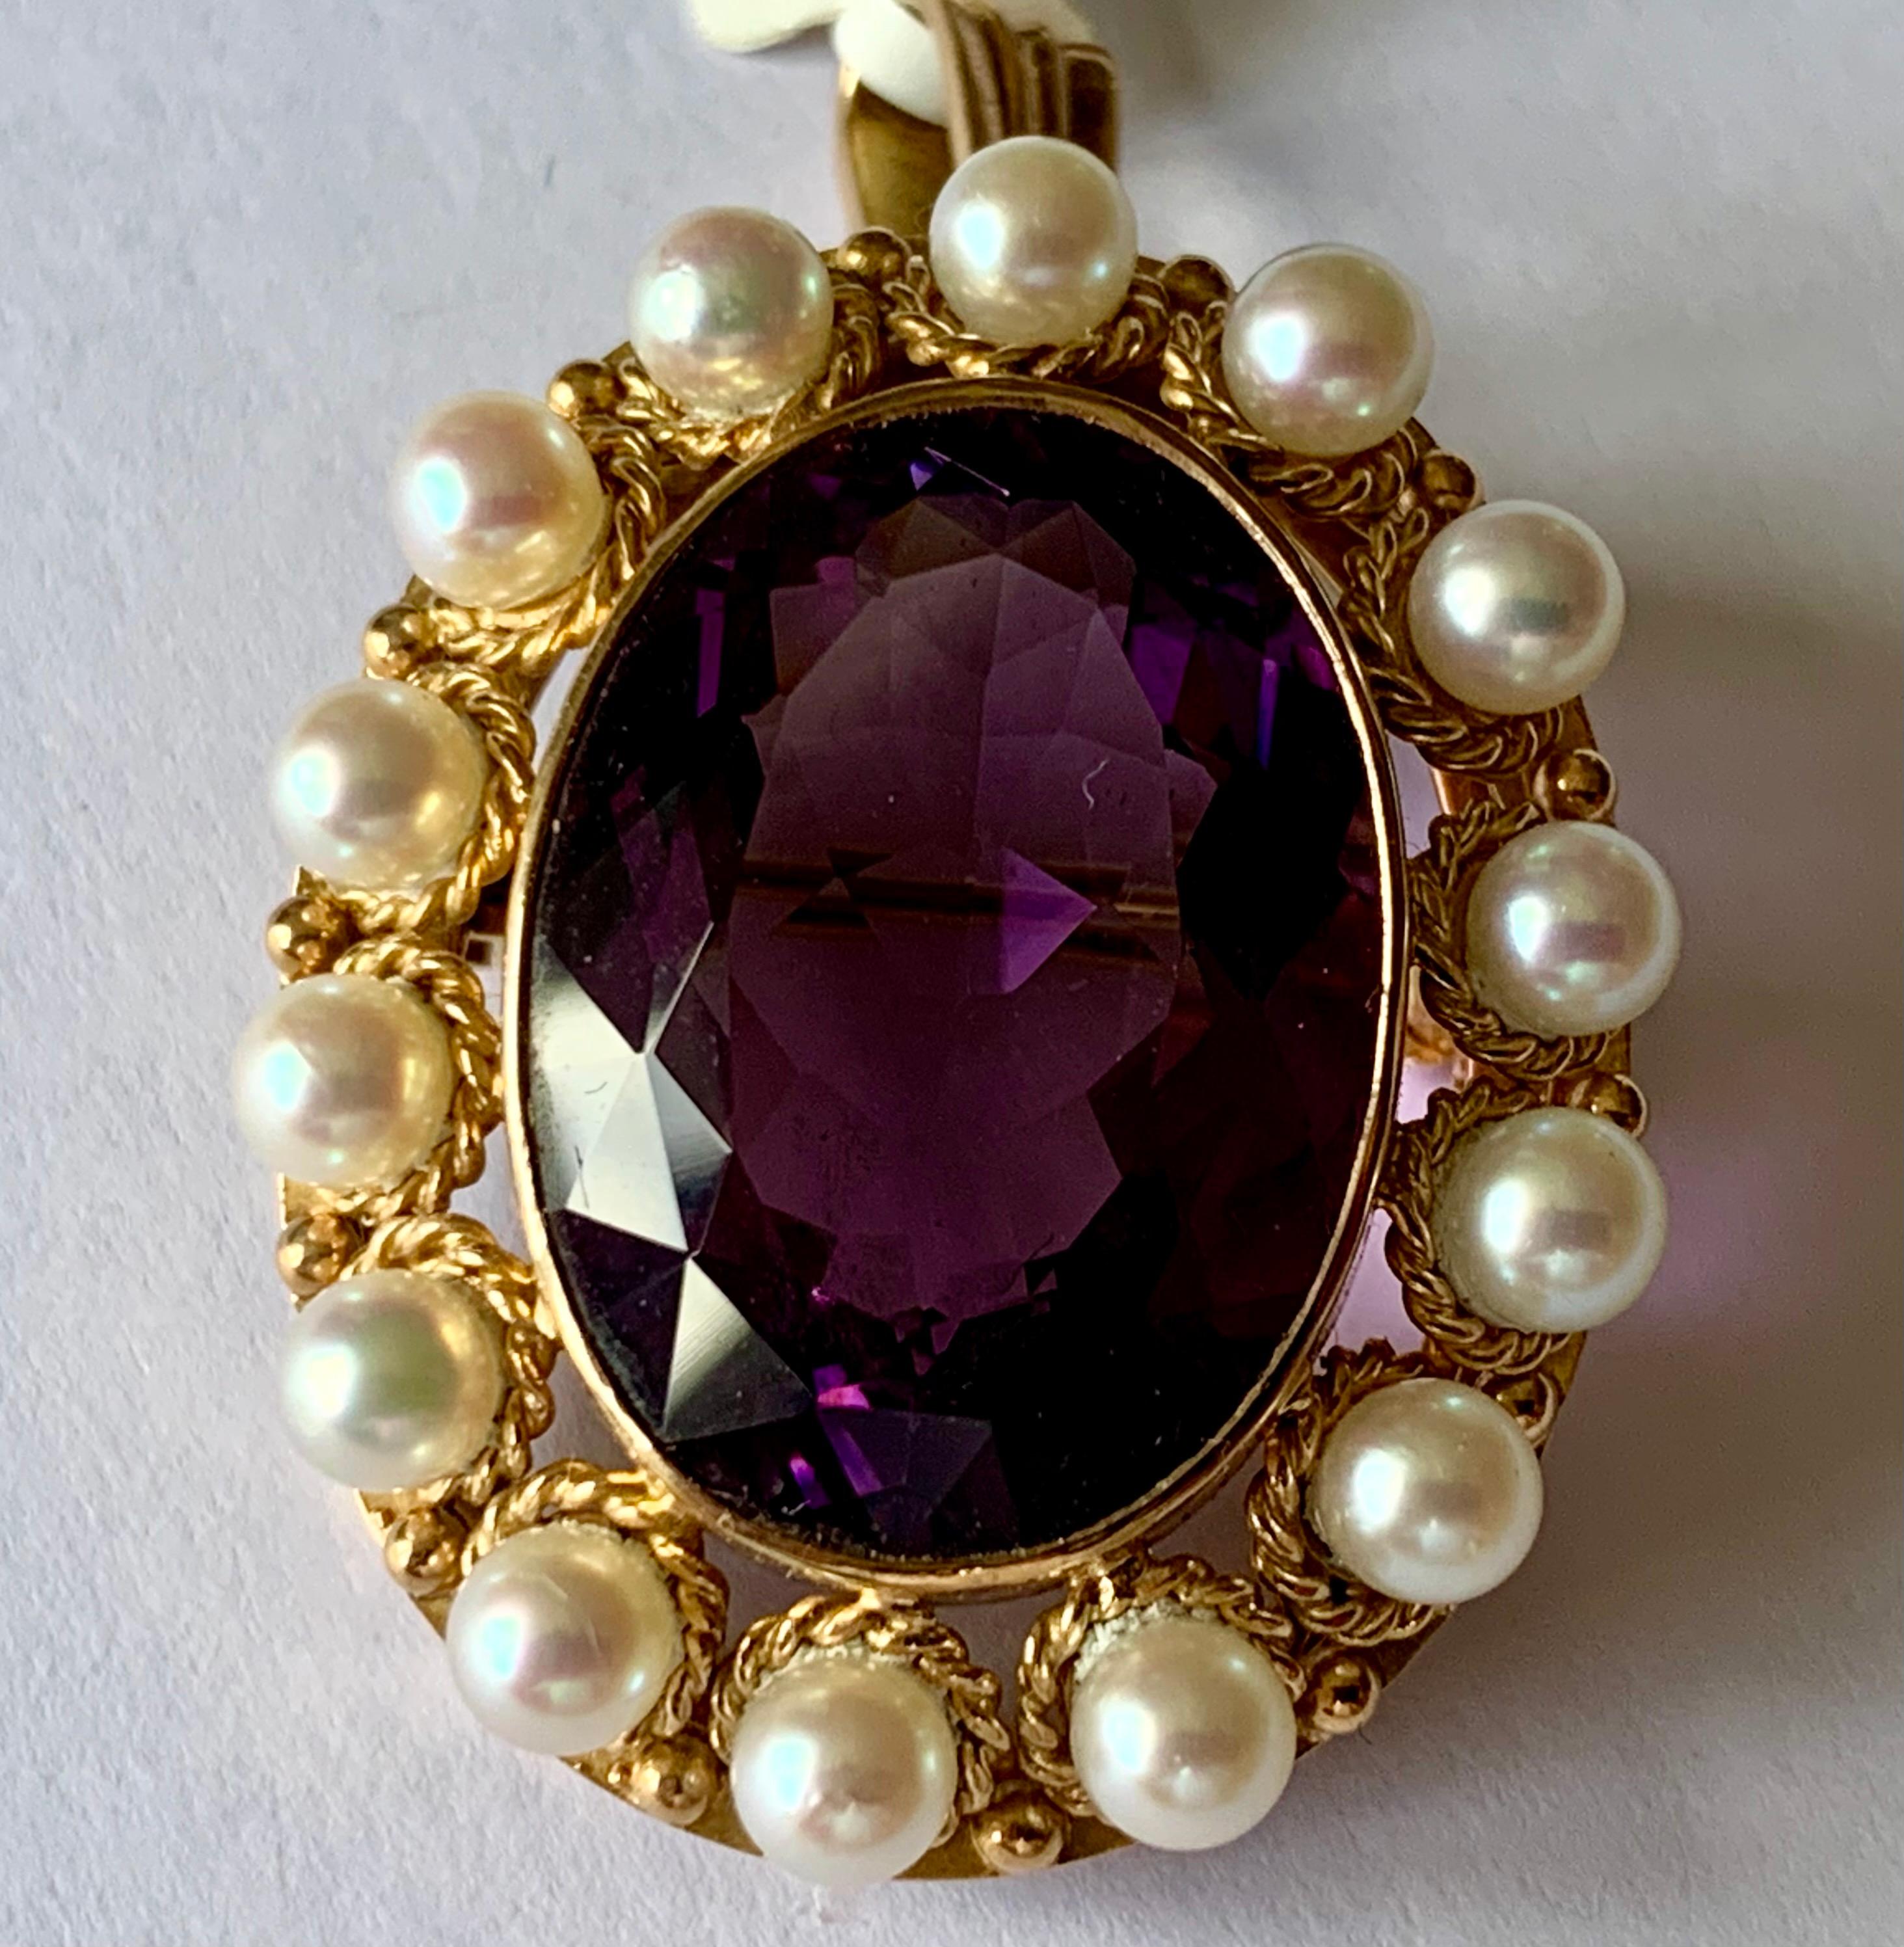 Romantic Vintage brooch/pendant in 18 K yellow Gold inspired by the Victorian era featuring an oval cut Amethyst and cultured pearls in a rope textured setting. 
Matching ring available!
Masterfully handcrafted piece! Authenticity and money back is